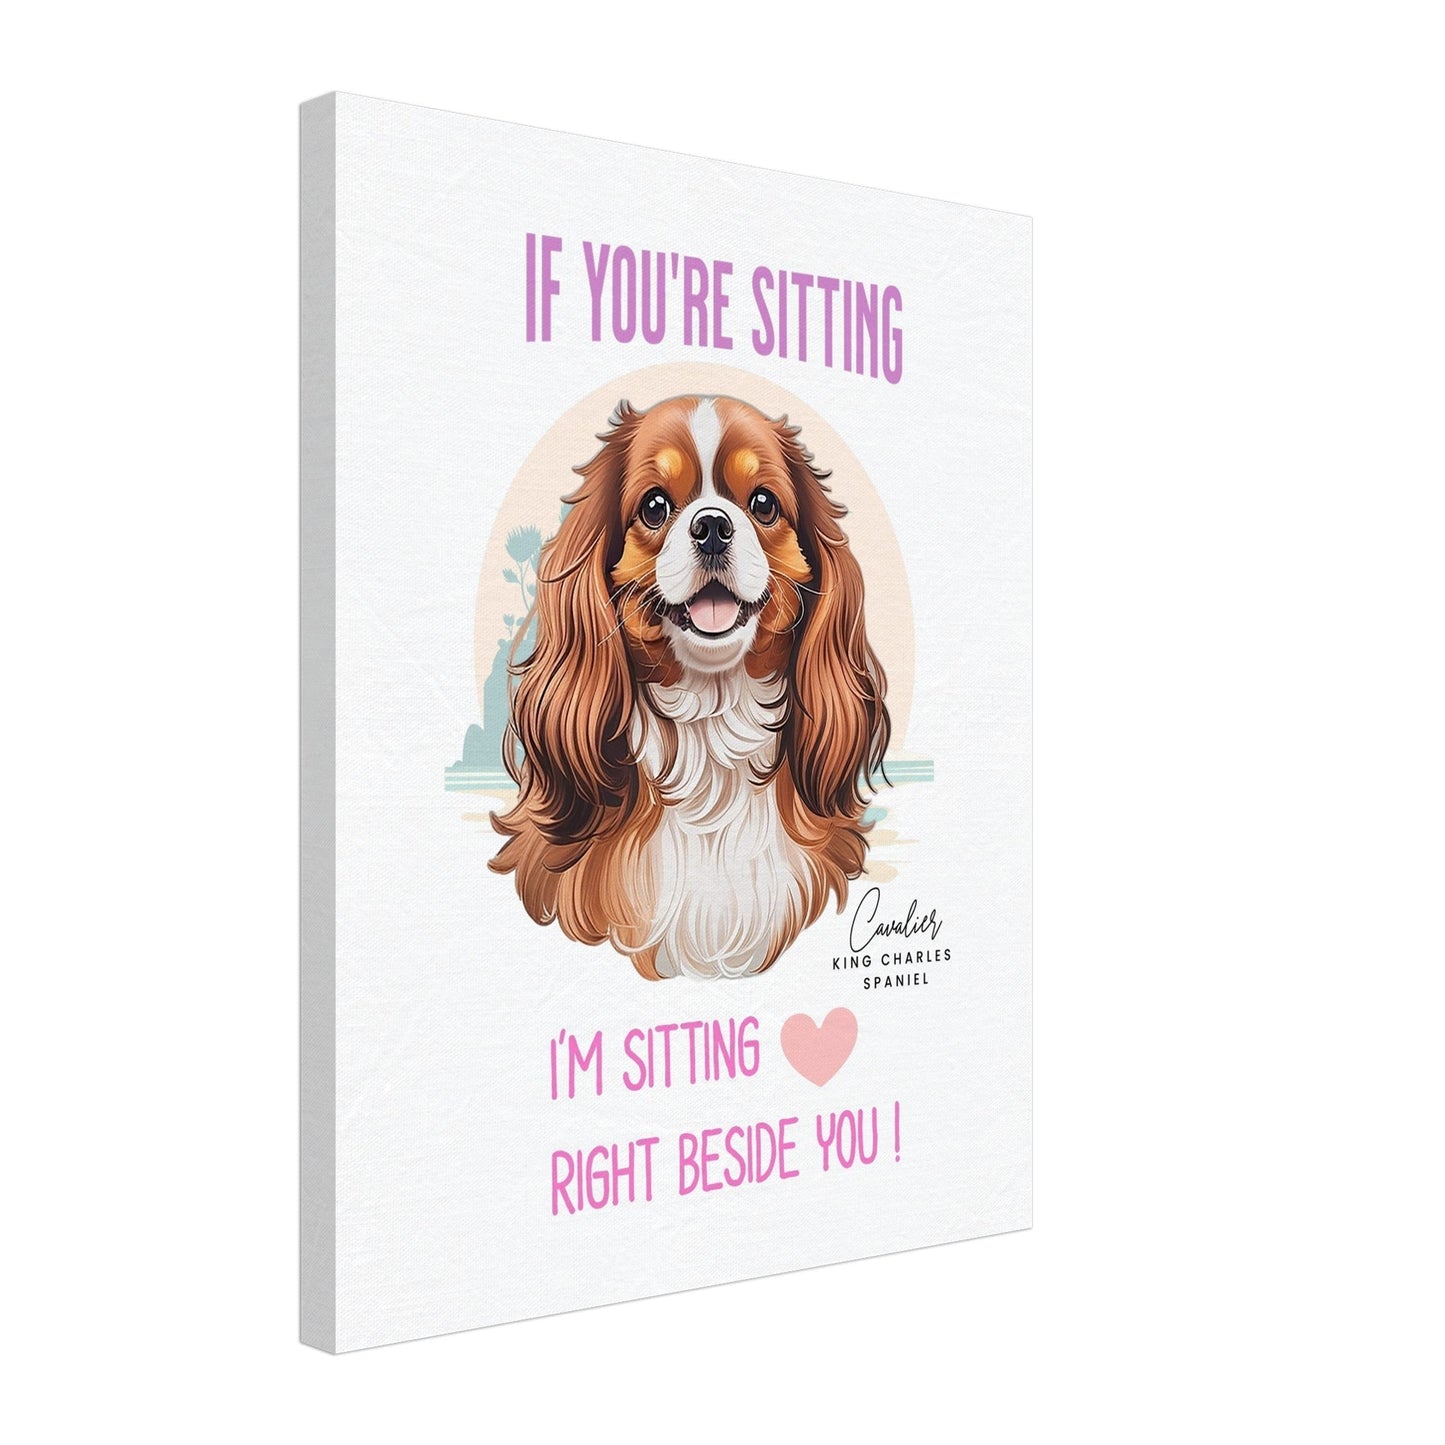 Cavalier King Charles Spaniel Canvas, Charles Spaniel Art59.99-(FREE Delivery) Shop now at itsaboutmydog.com, Cavalier King Charles Spaniel, Charles Spaniel, charles spaniel art, Charles Spaniel Dog, Charles Spaniel Draw, dog canvas, King Charles Spaniel